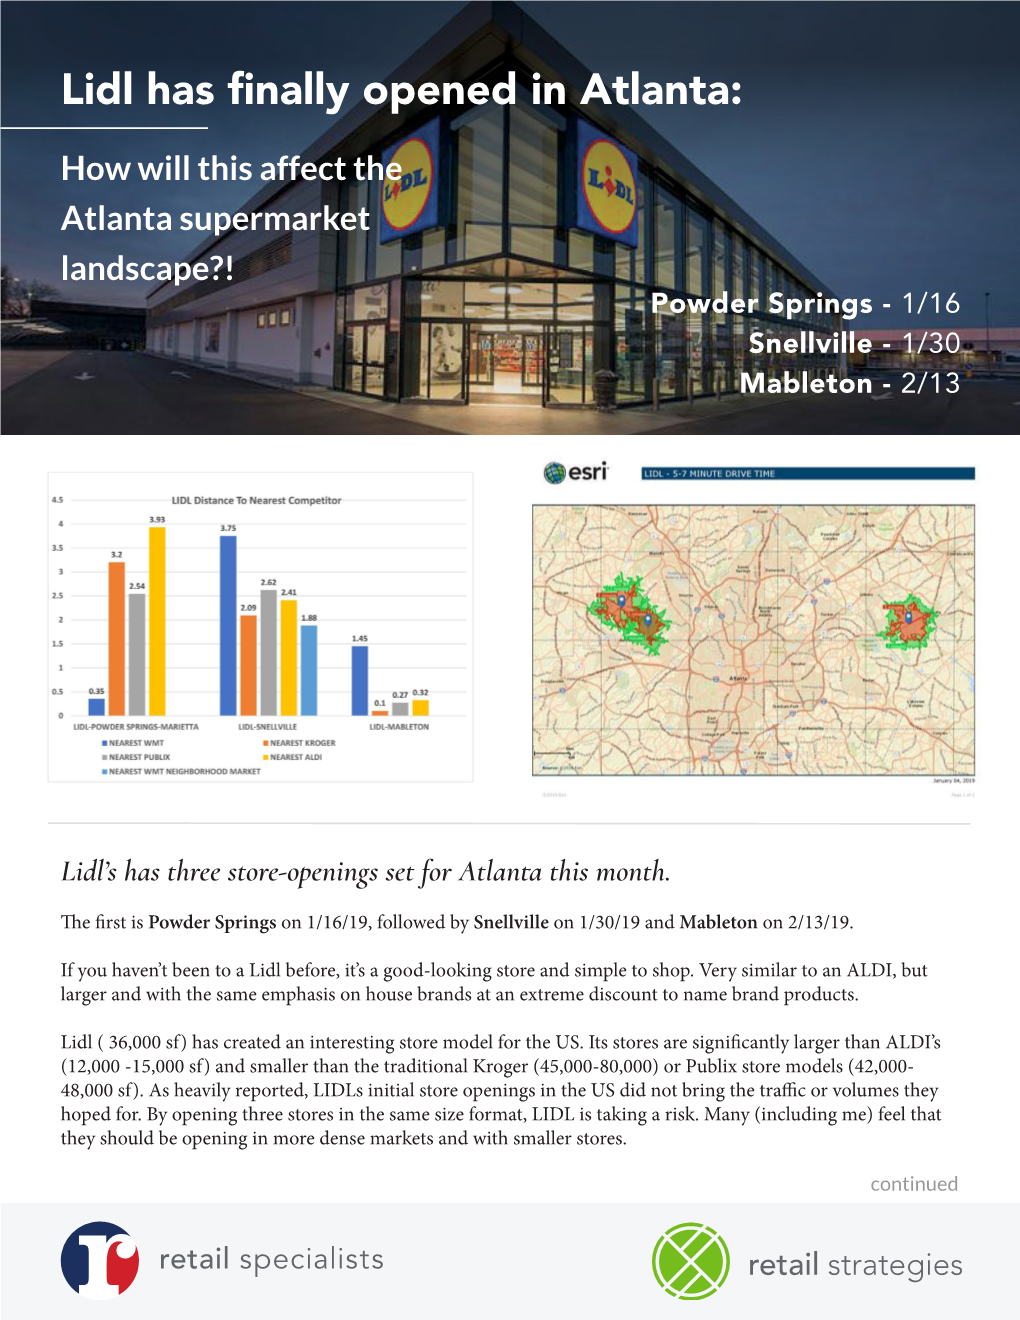 Lidl Has Finally Opened in Atlanta: How Will This Affect the Atlanta Supermarket Landscape?! Powder Springs - 1/16 Snellville - 1/30 Mableton - 2/13